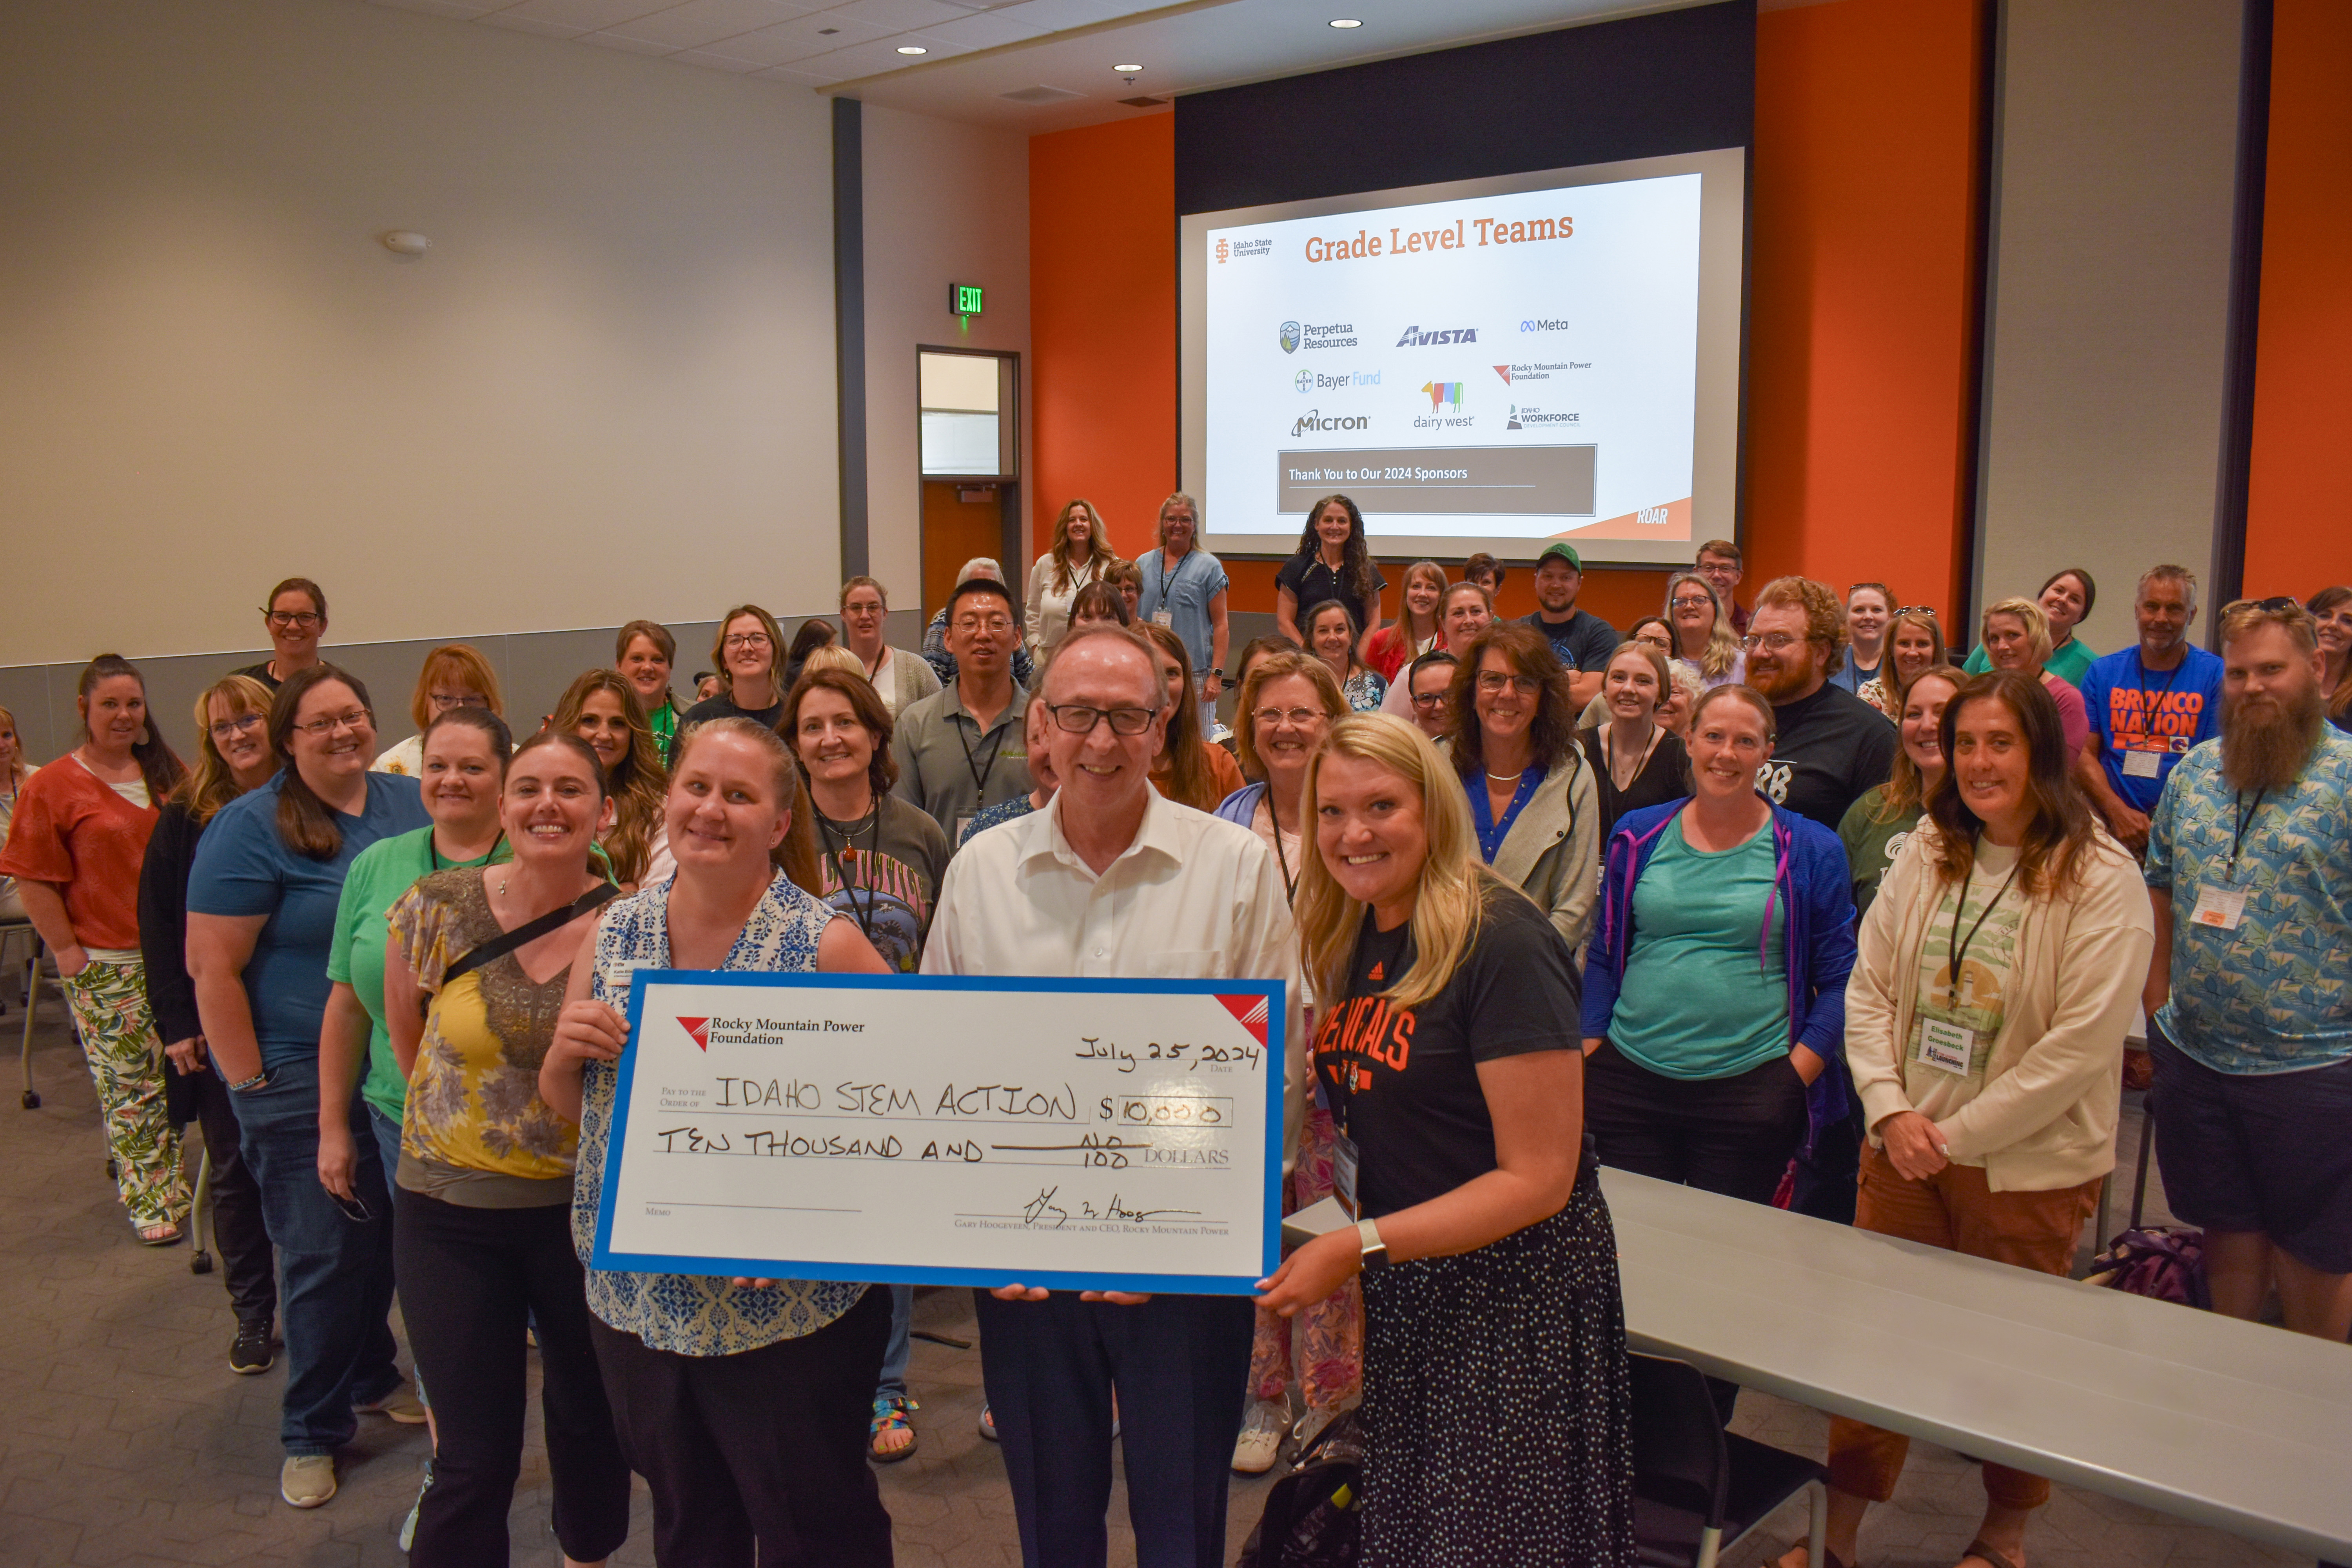 Members of the Idaho Stem Action Group receives a $10,000 check from Rocky Mountain Power Foundation